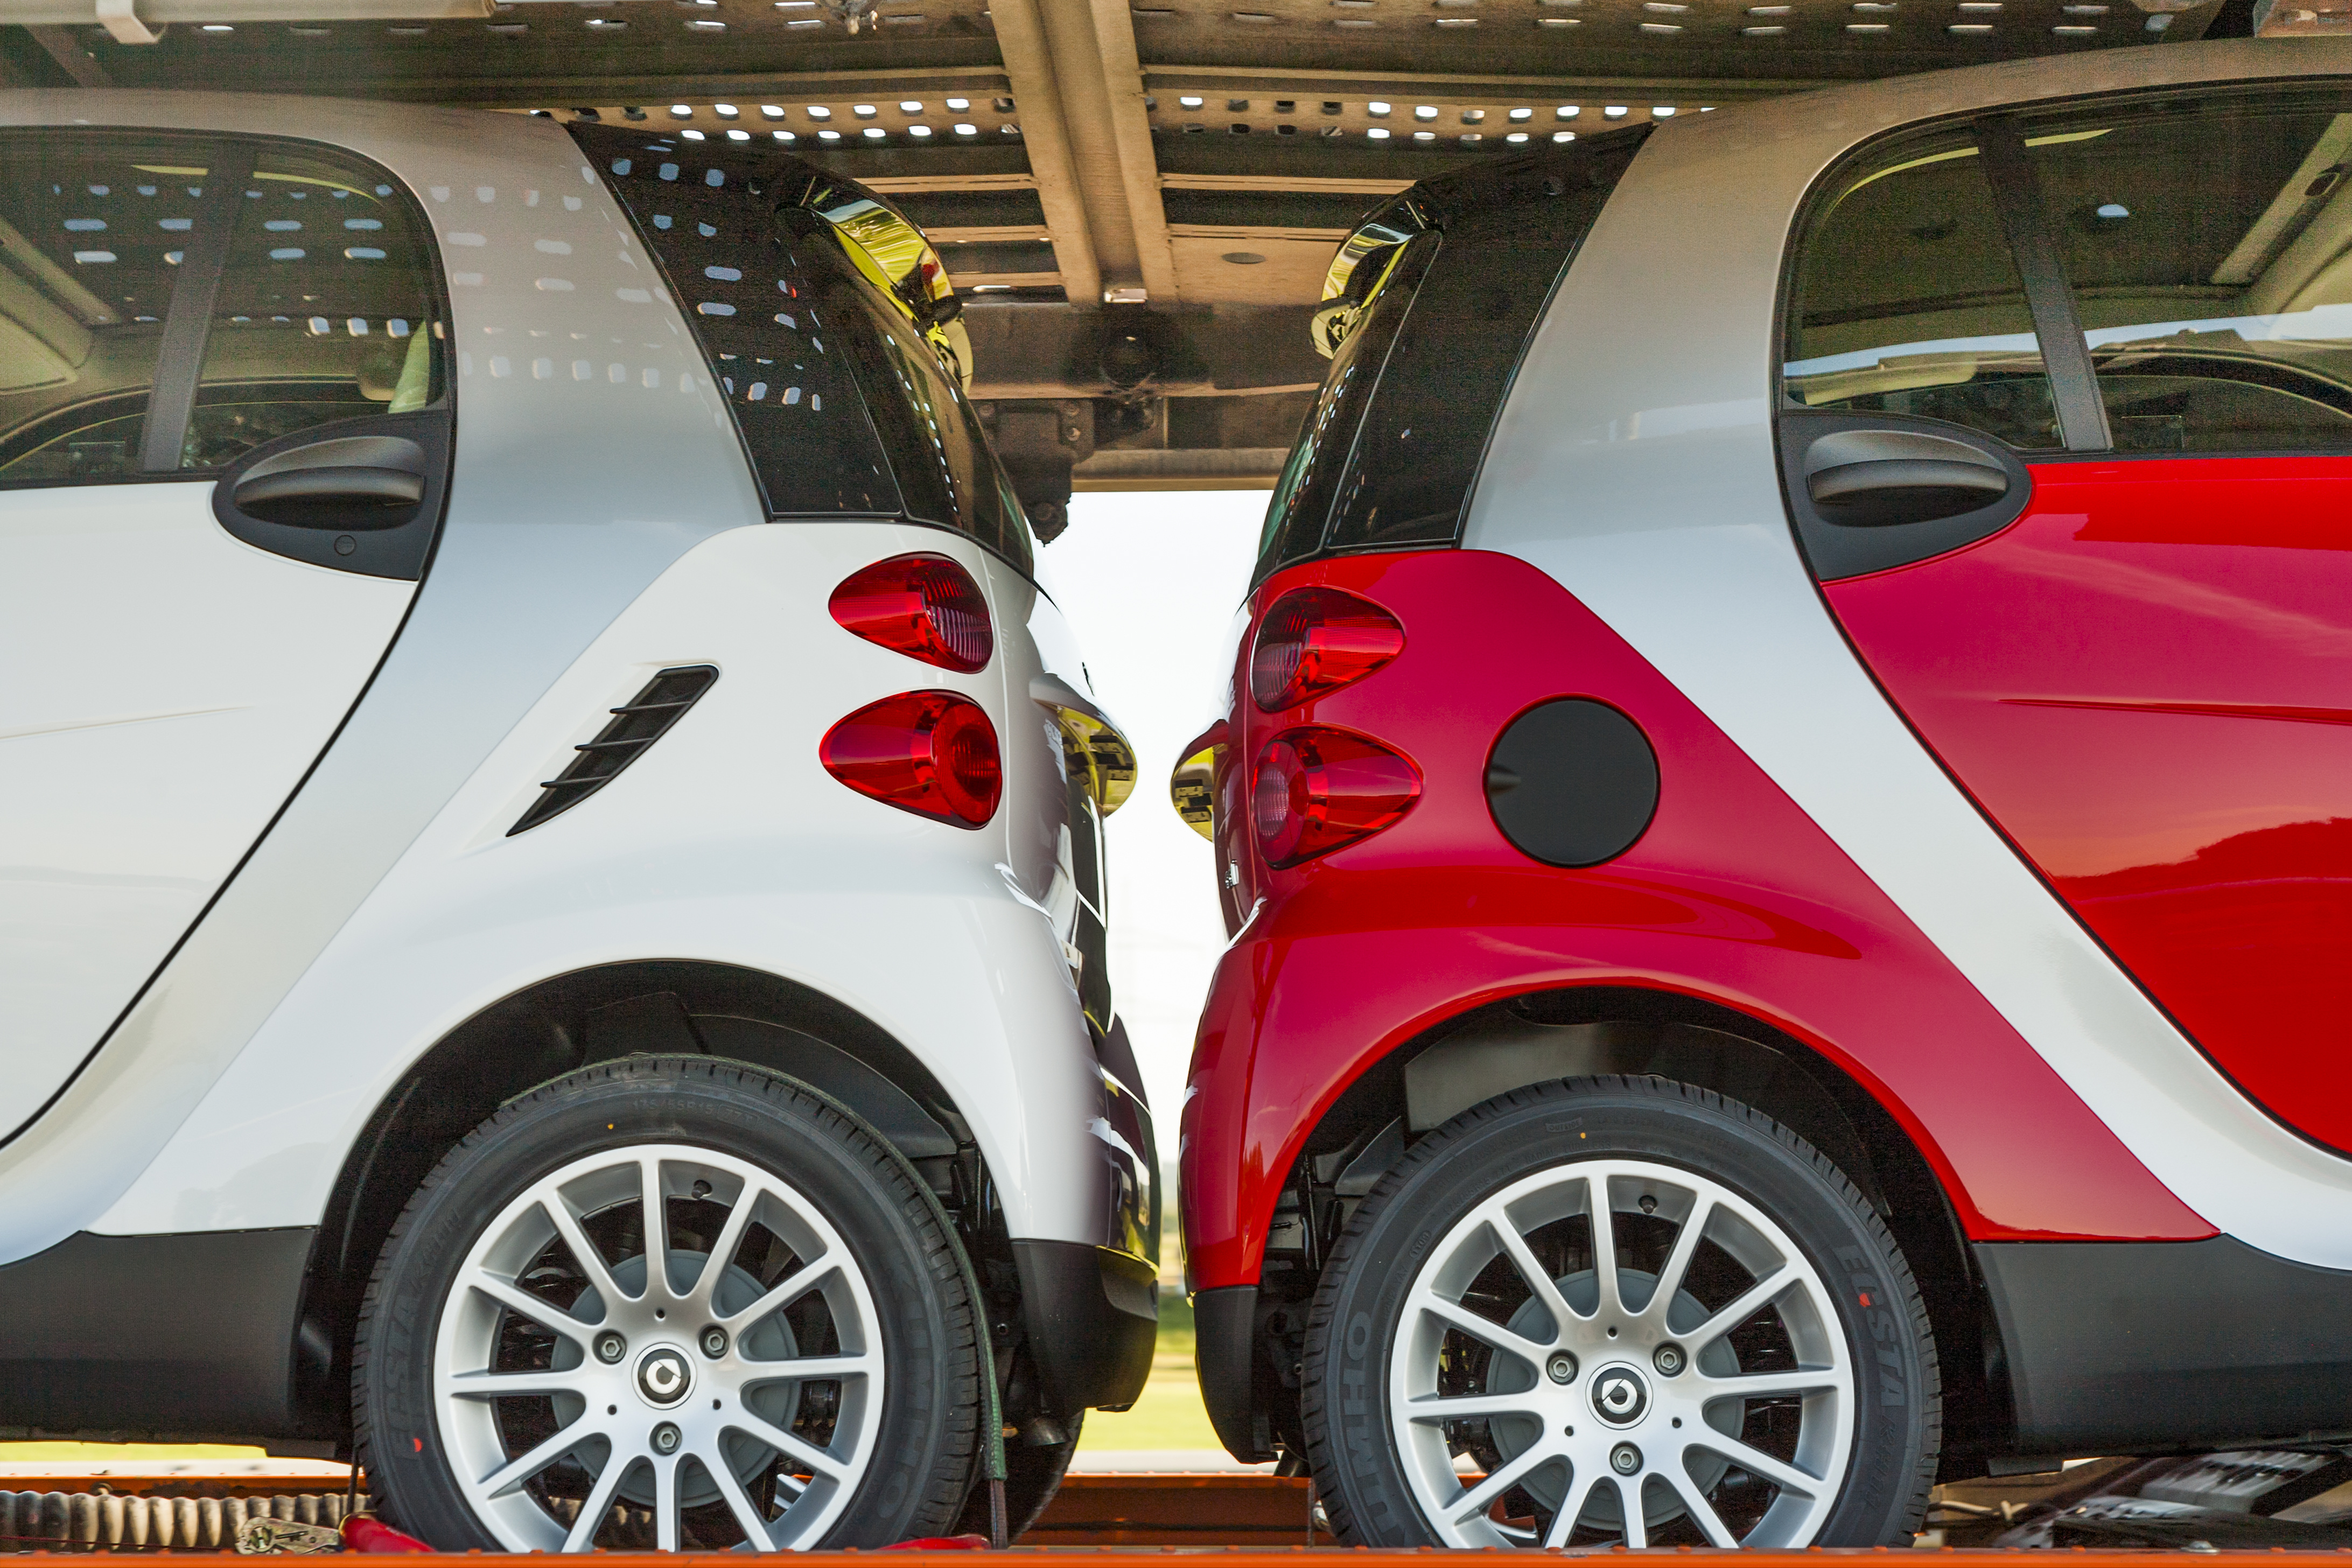 5 Facts As Fun As the Smallest Car on Earth